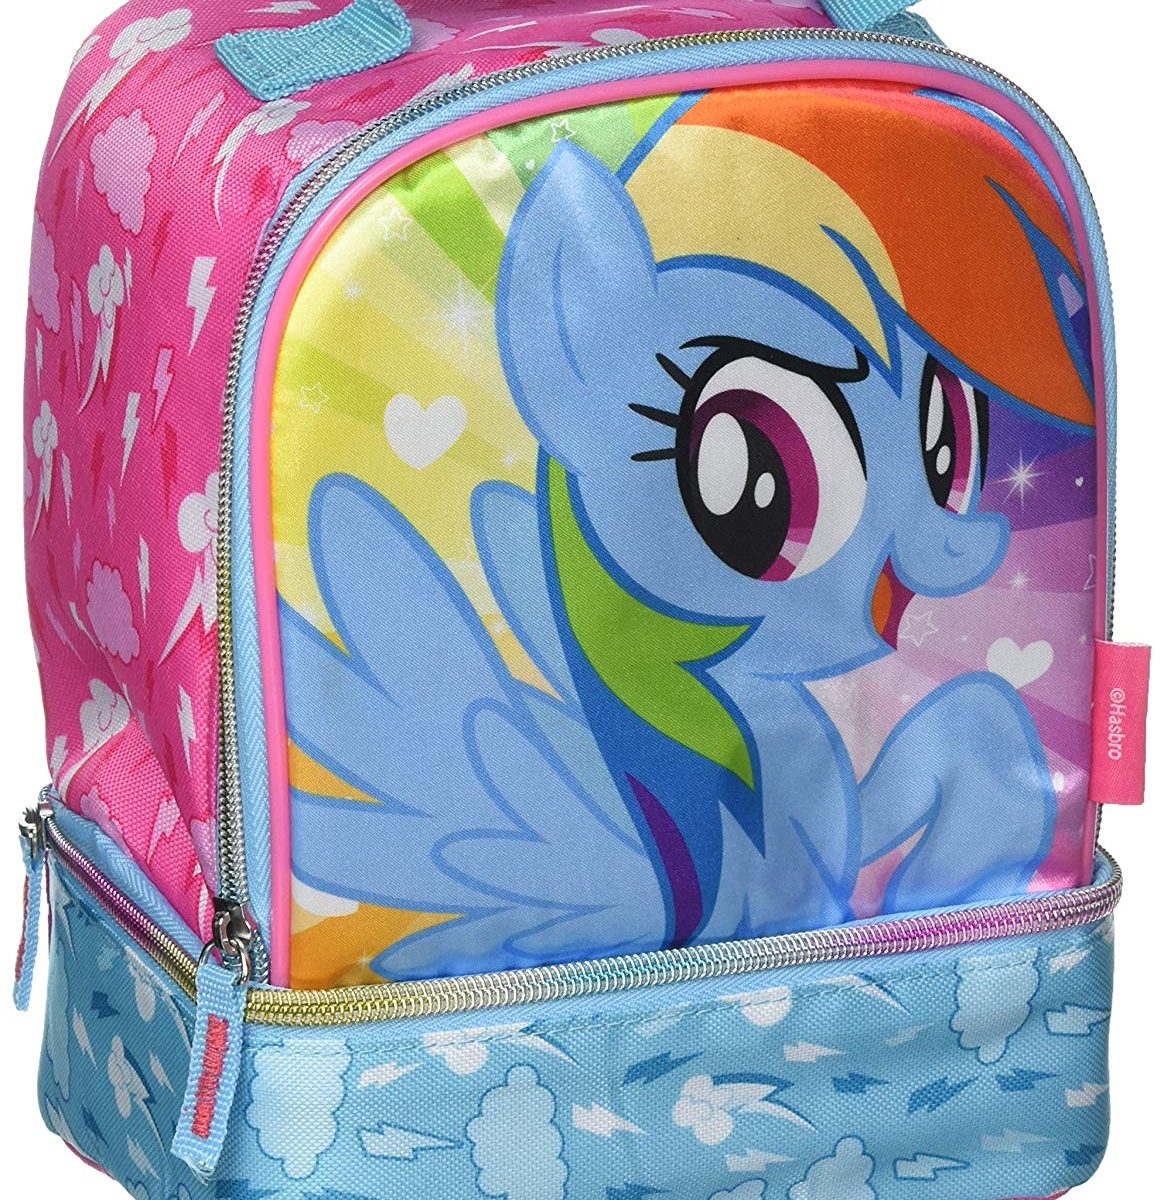 MLP: TM Thermos Dual Compartment Lunch Kit 1